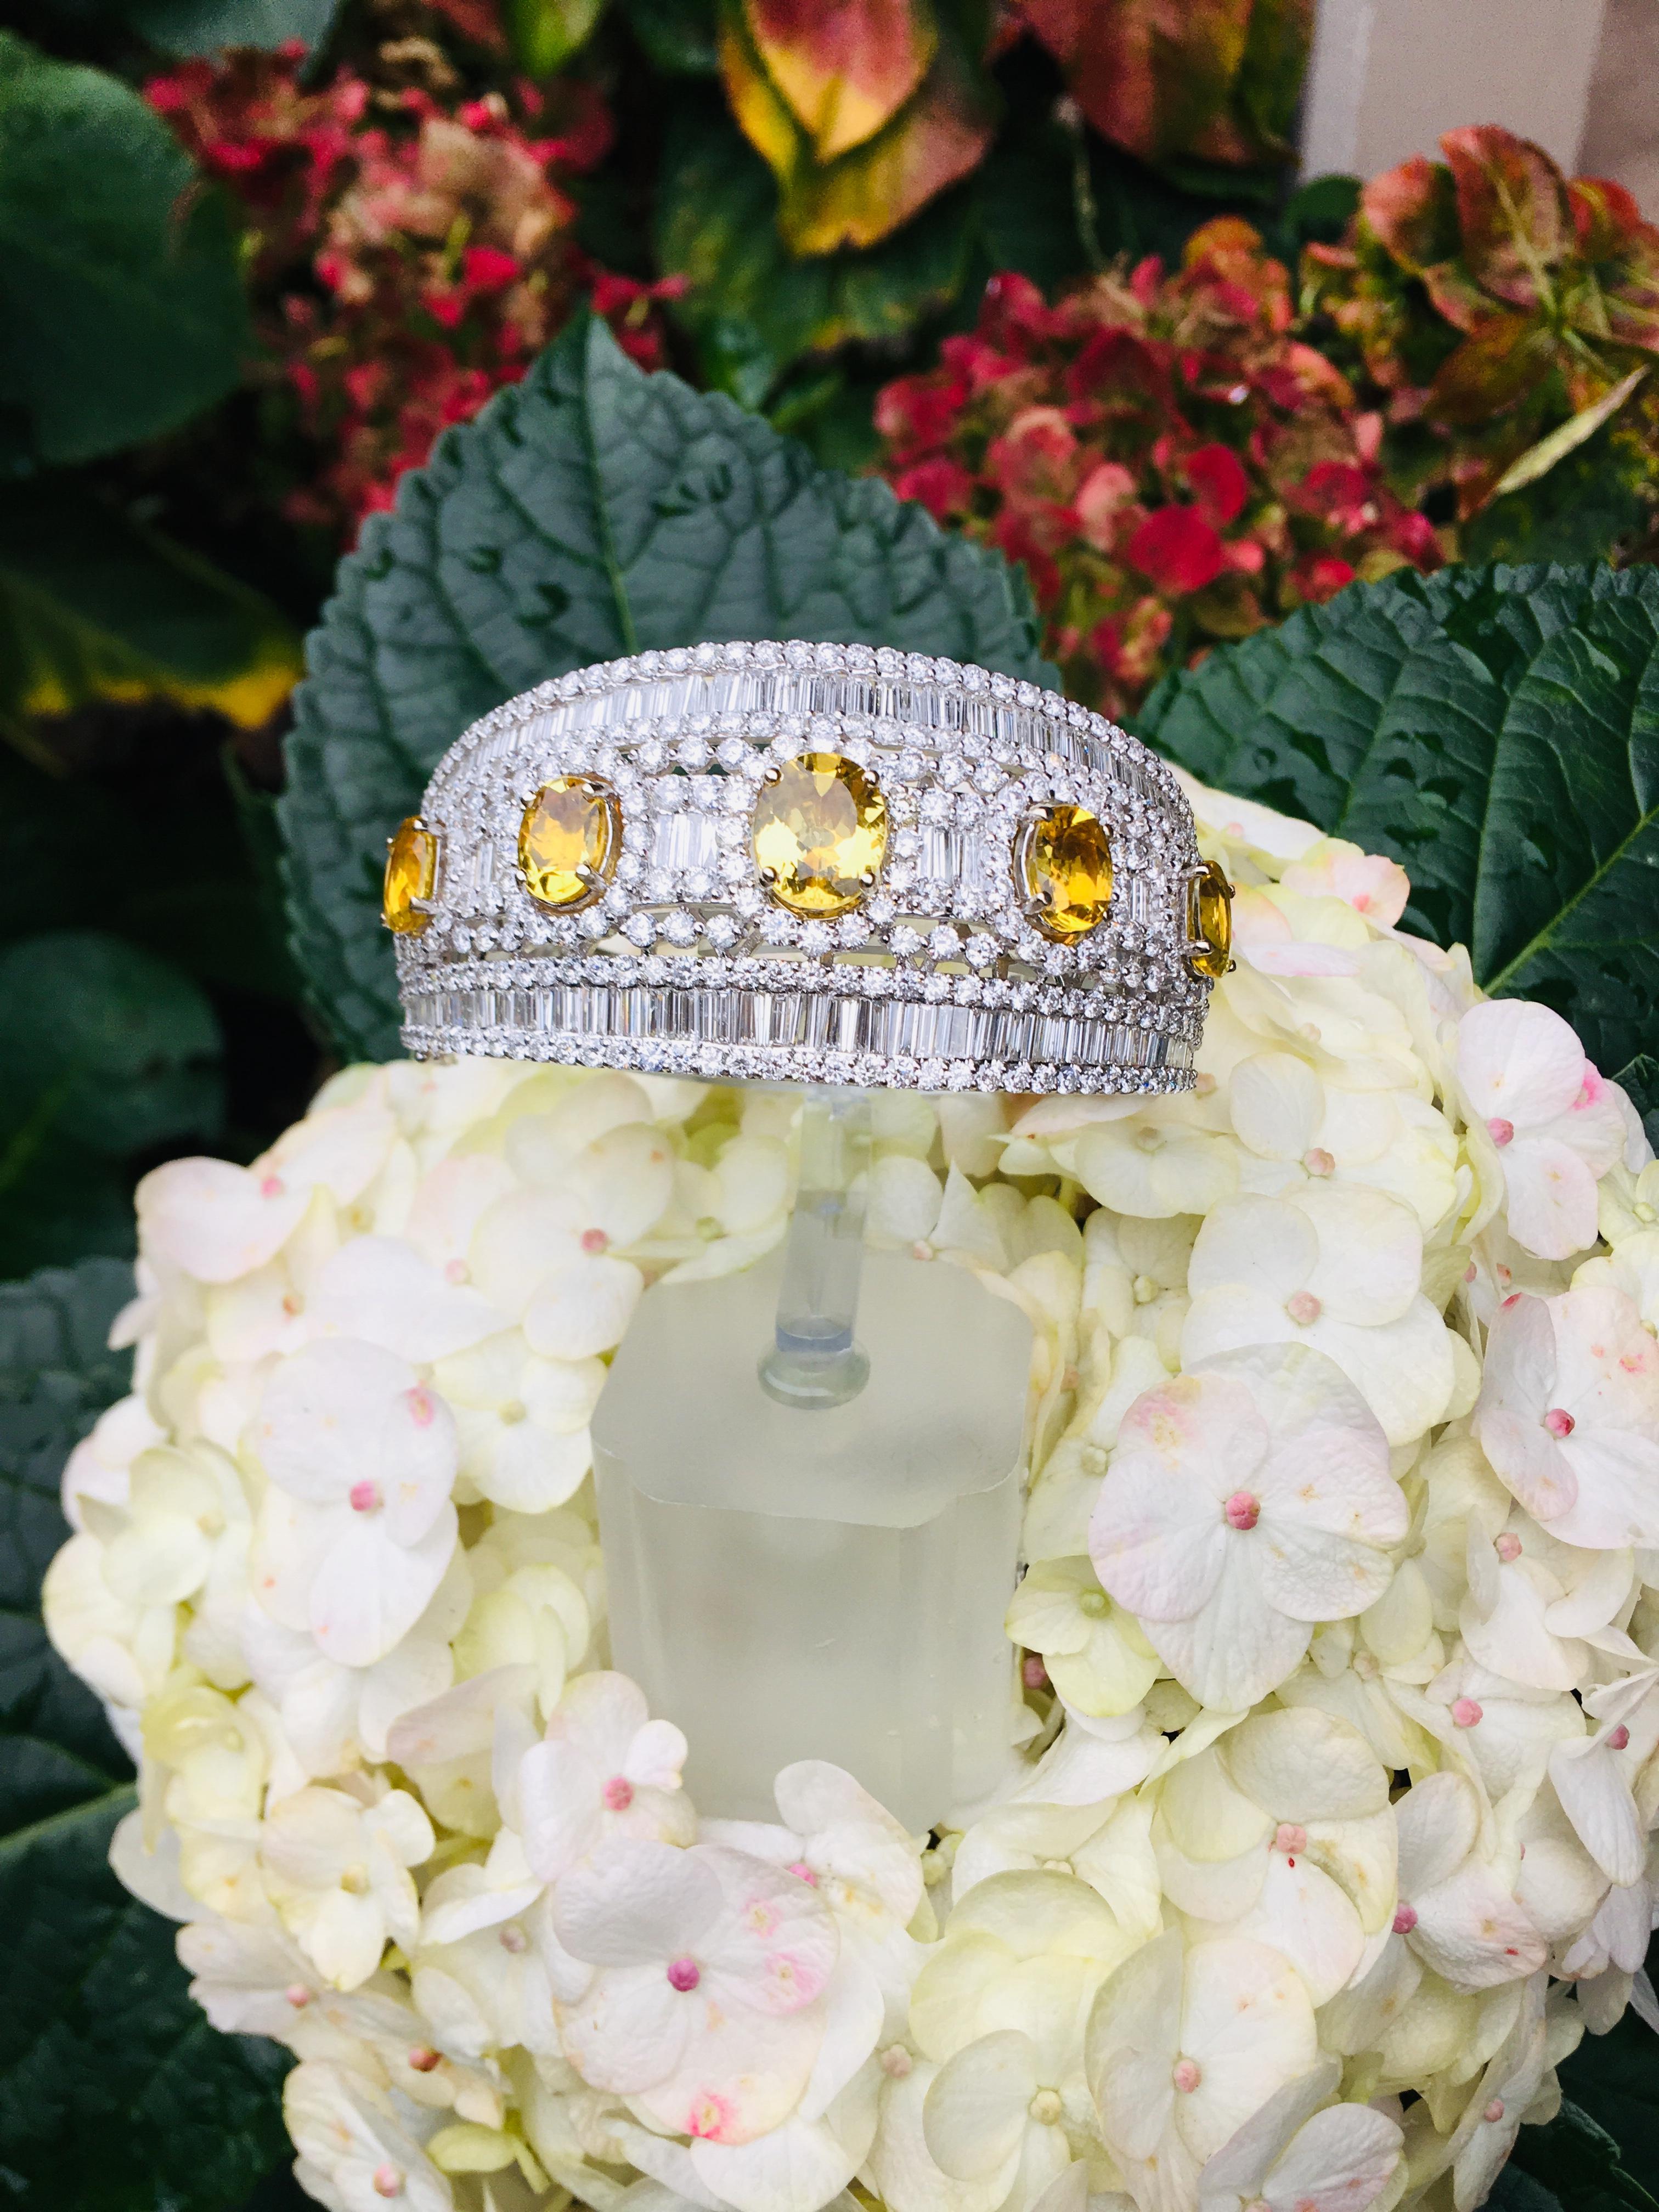 Incredible 18 karat white gold hinged, wide tapered bangle estate bracelet features approximately 28 carats of invisibly set diamond baguettes and prong set round brilliant diamonds, accented by 5 prong set, oval cut yellow topazes weighing